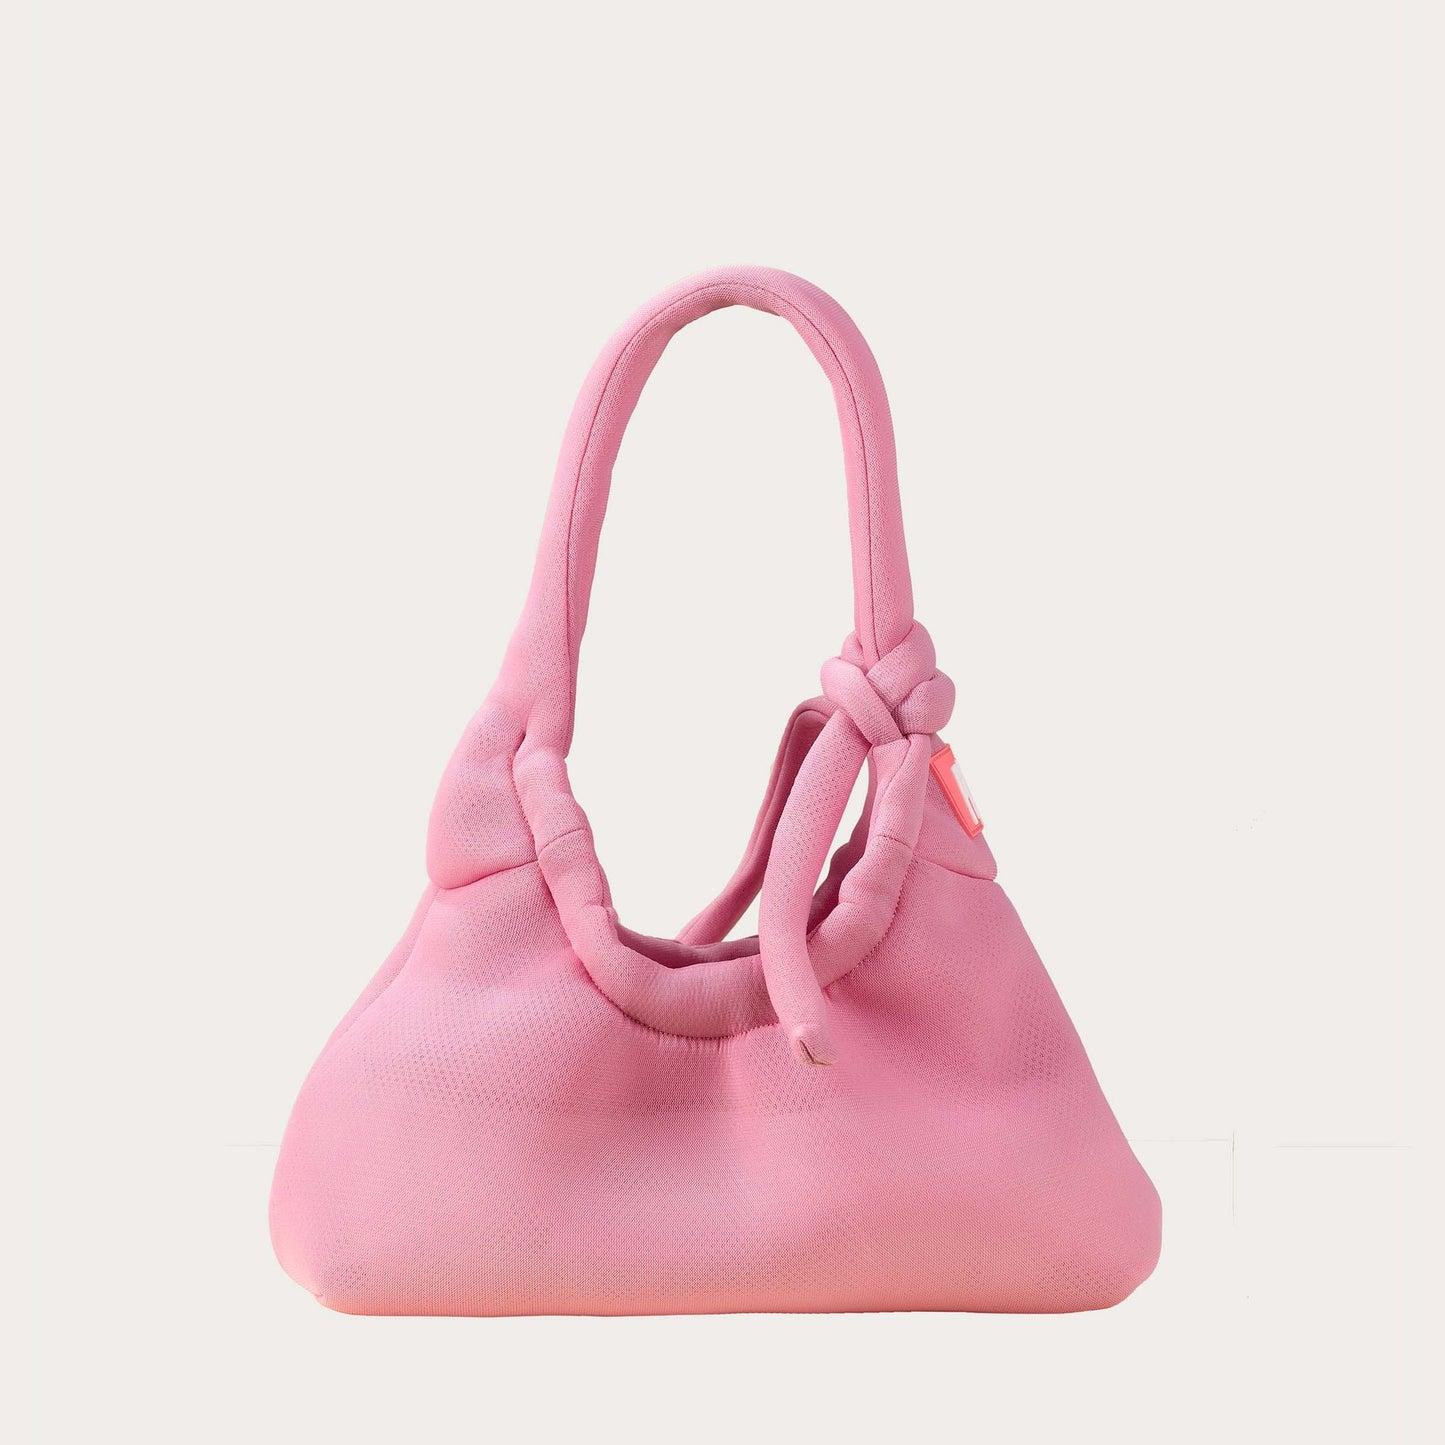 Everyday Carry Bag Small in Dusty Pink